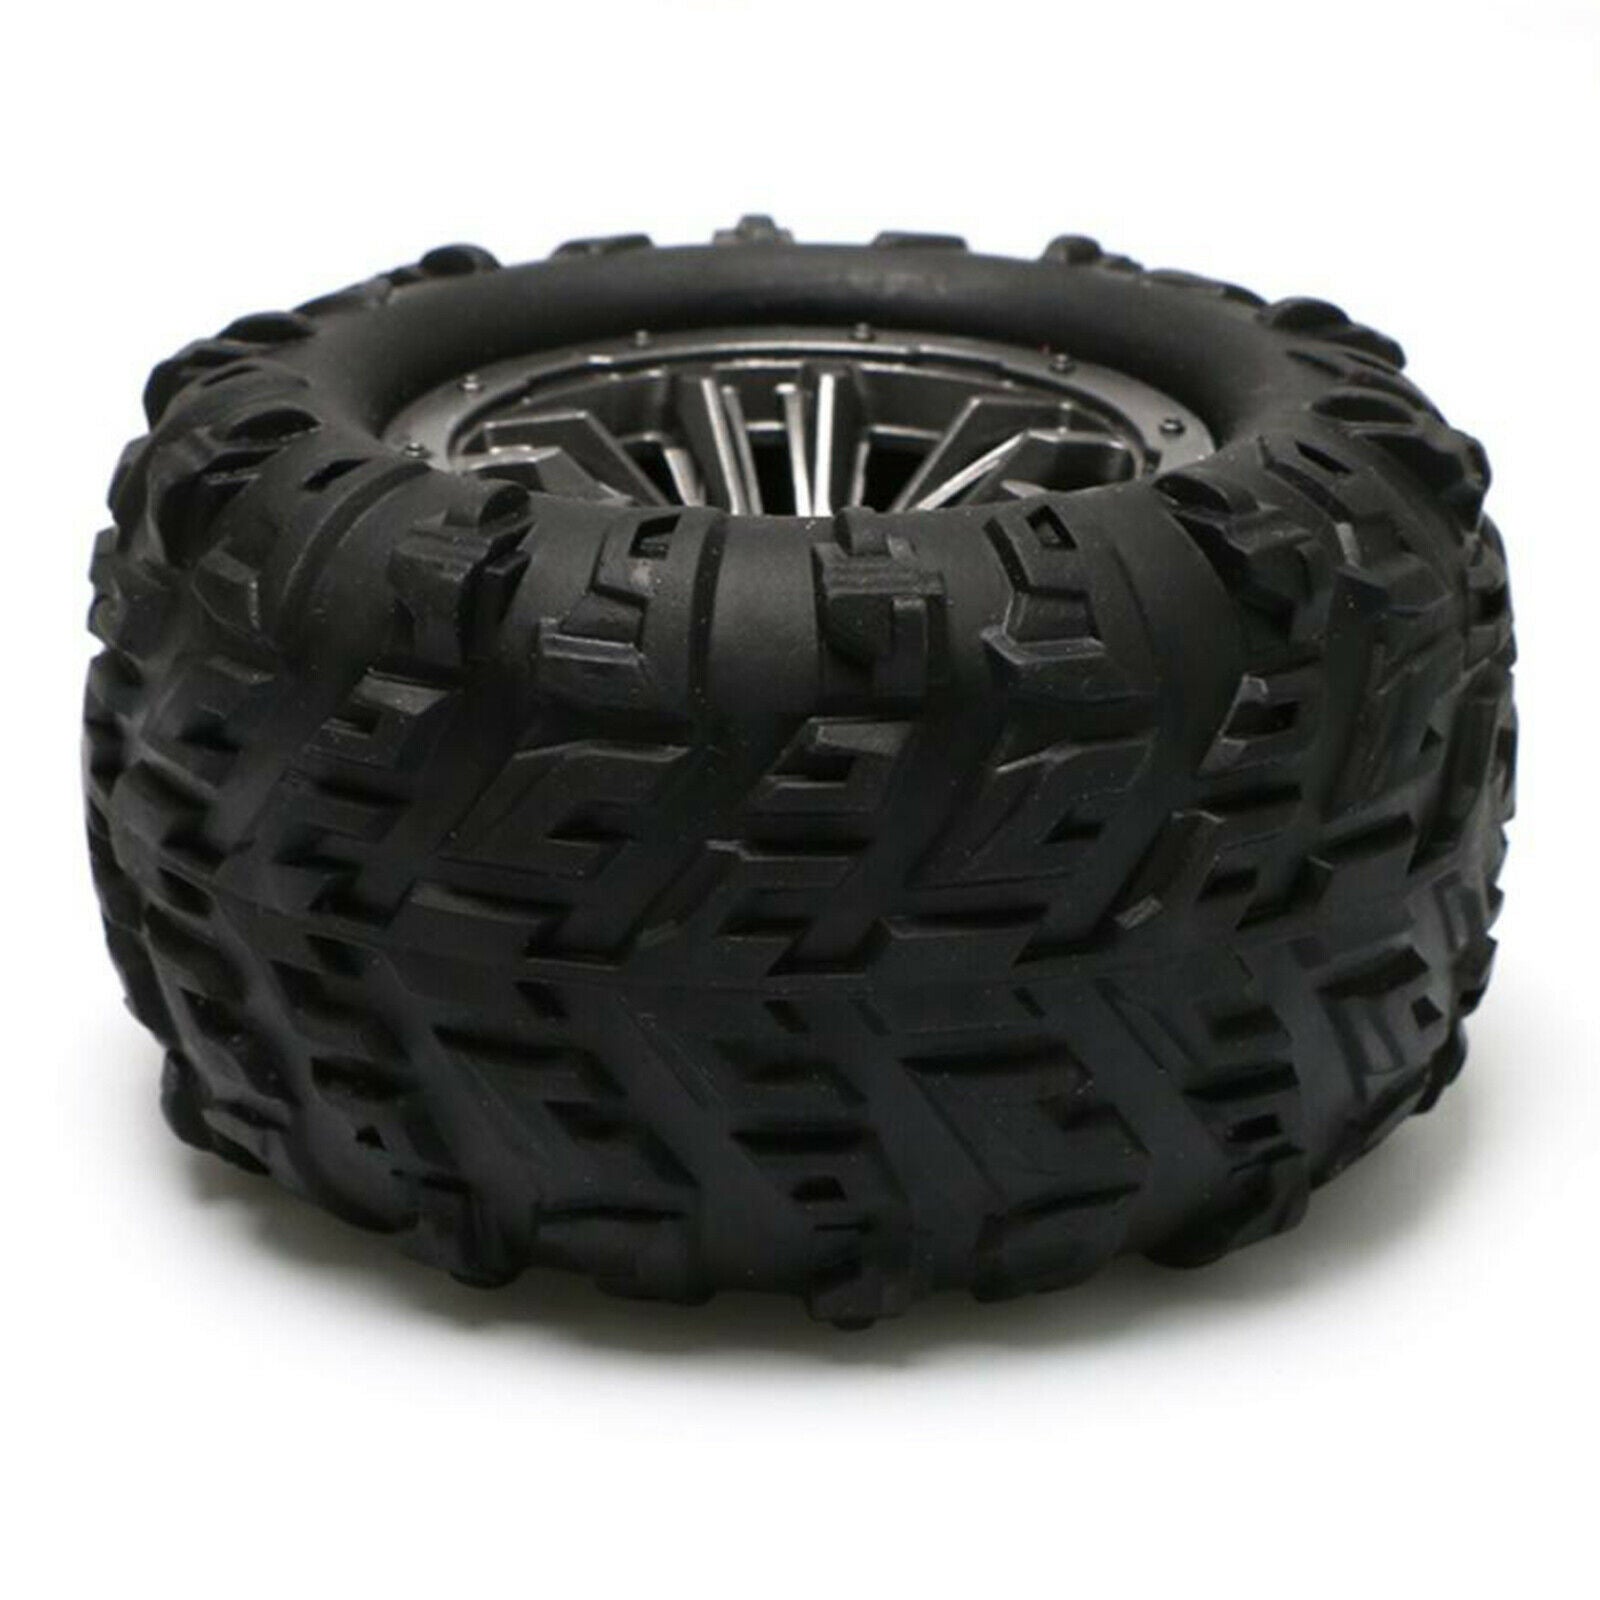 1 Pair Rubber Tyres for Wltoys 12428 12423 1:12 RC Monster Truck Spares Parts